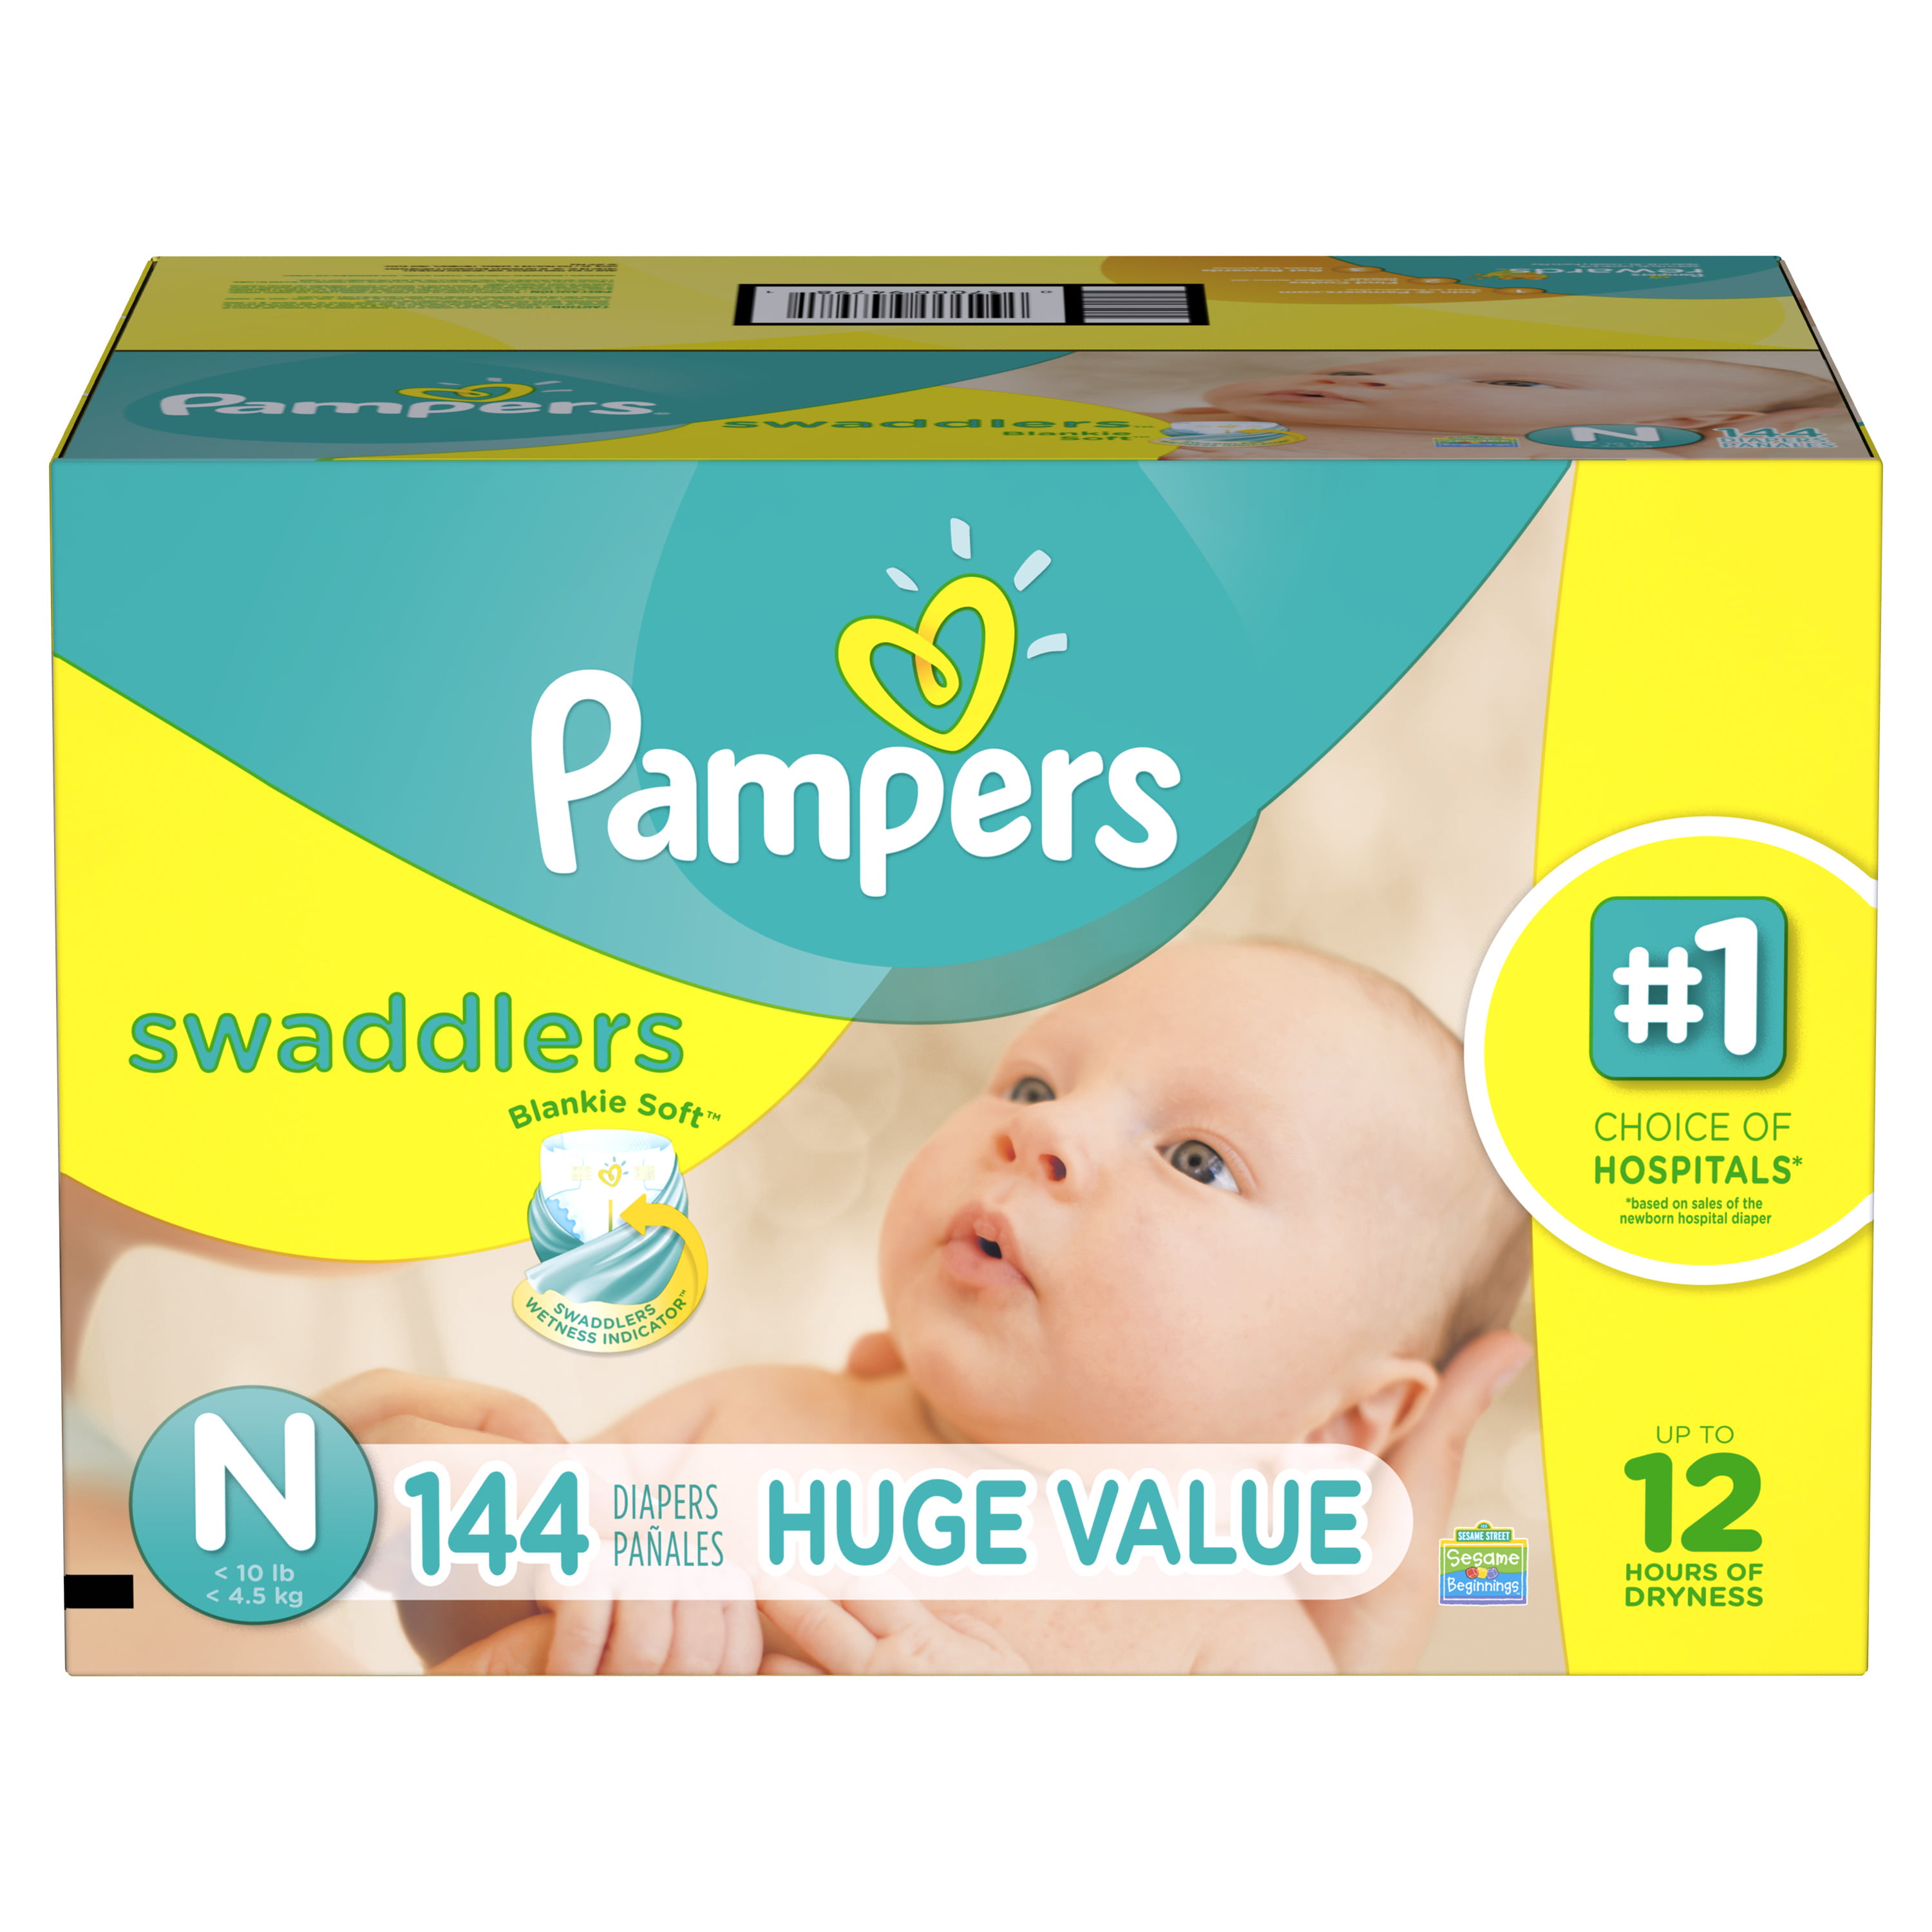 Pampers Swaddlers Newborn Diapers Size N 144 count